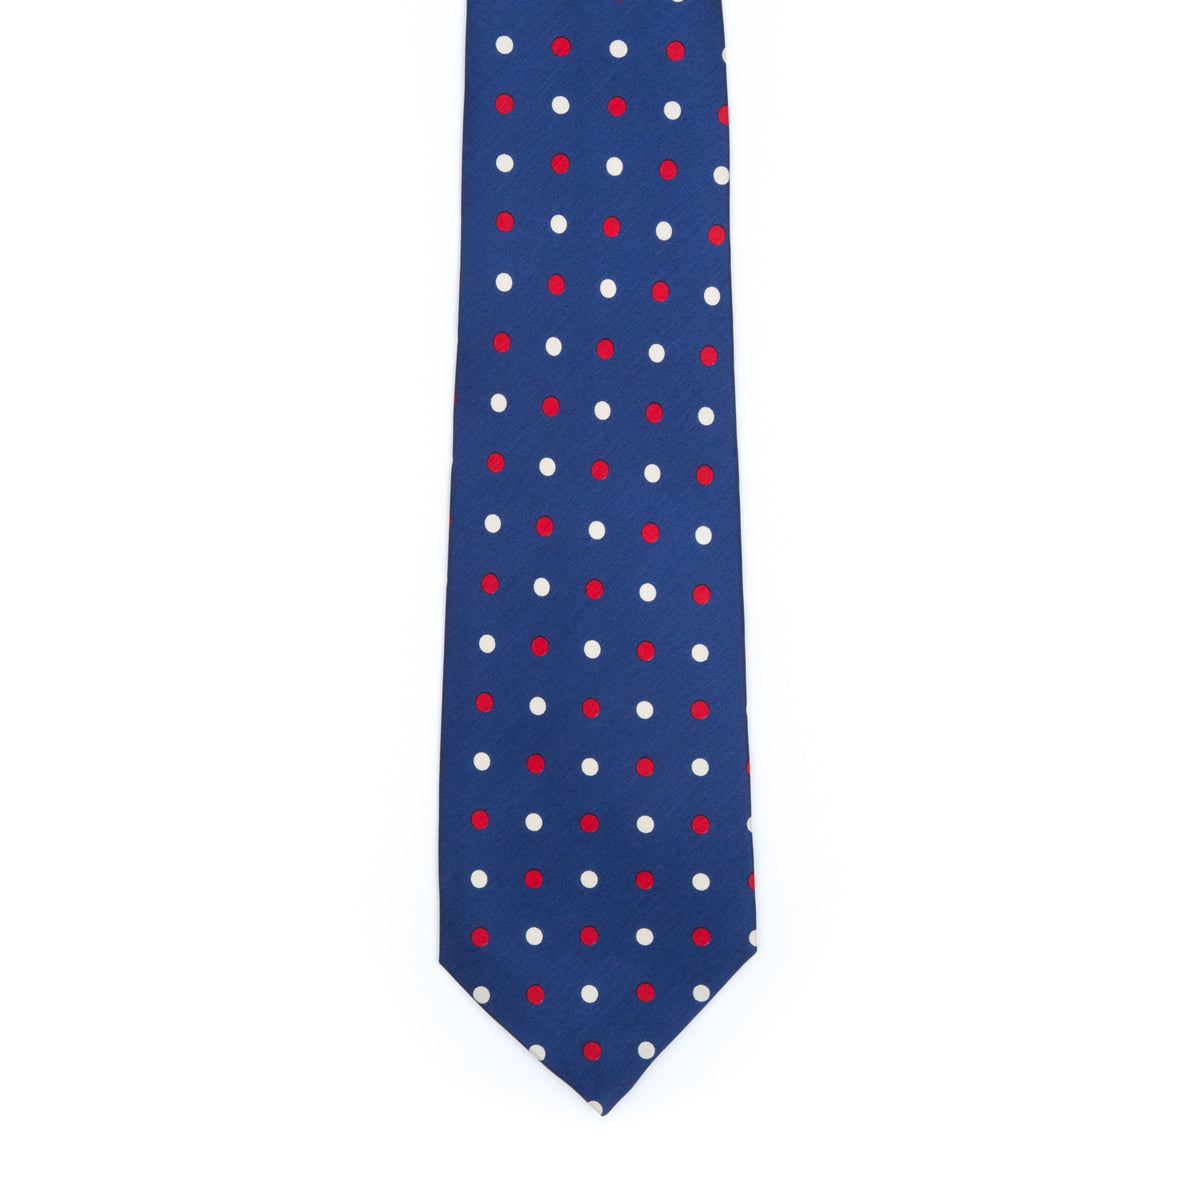 Blue speckled tie